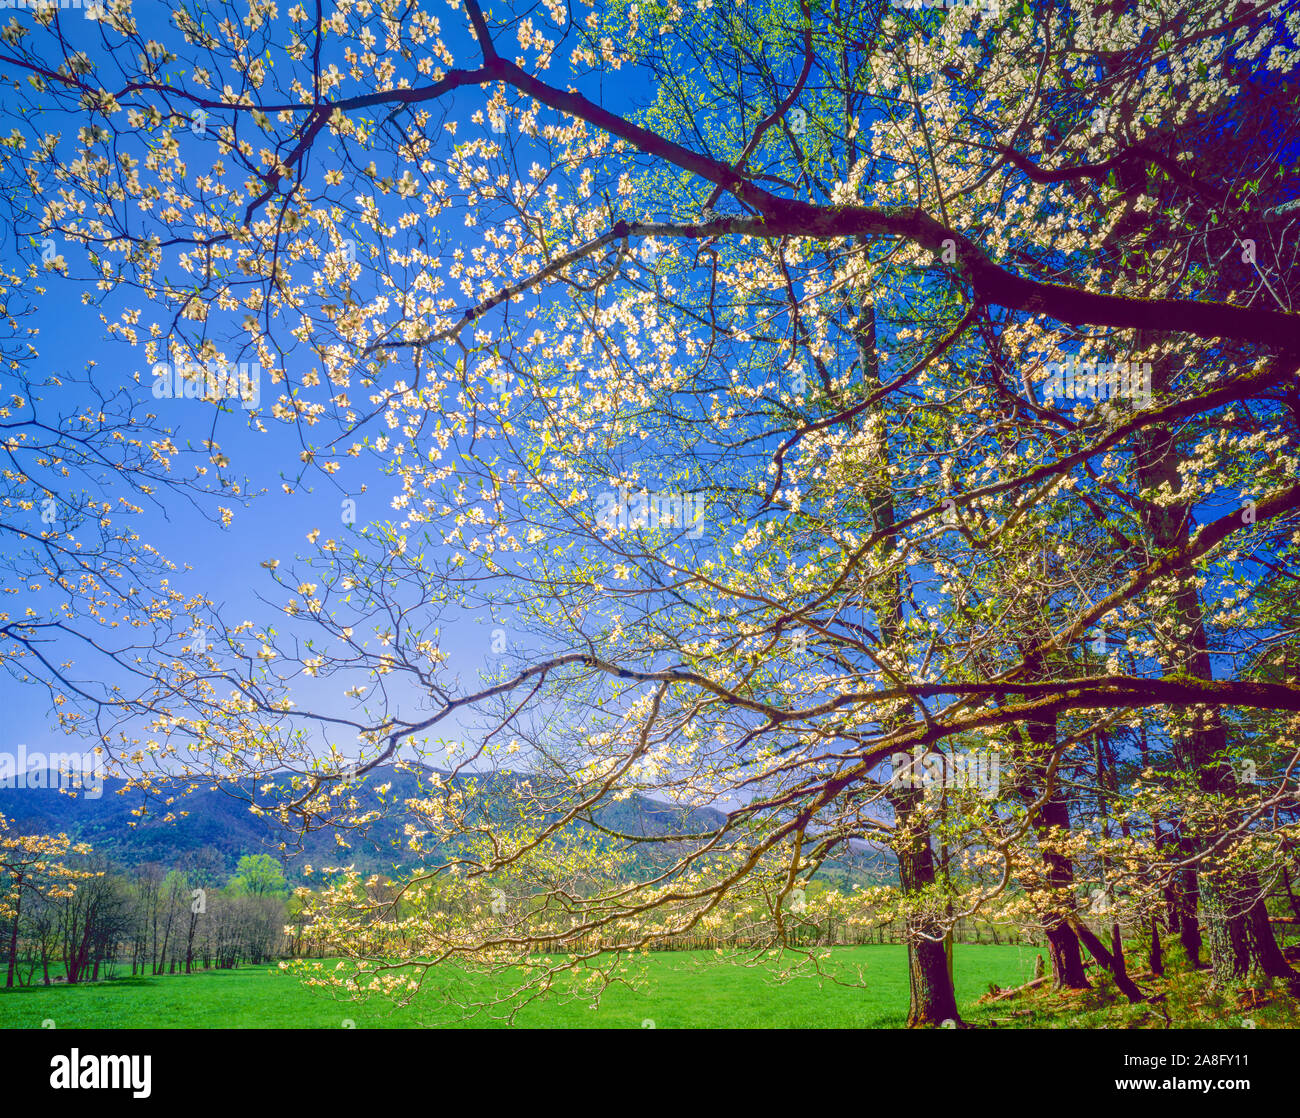 Dogwood blooms in Cades Cove, Great Smoky Mountains National Park, Tennessee, Historic pioneer settlement area, Appalachian Mountains Stock Photo